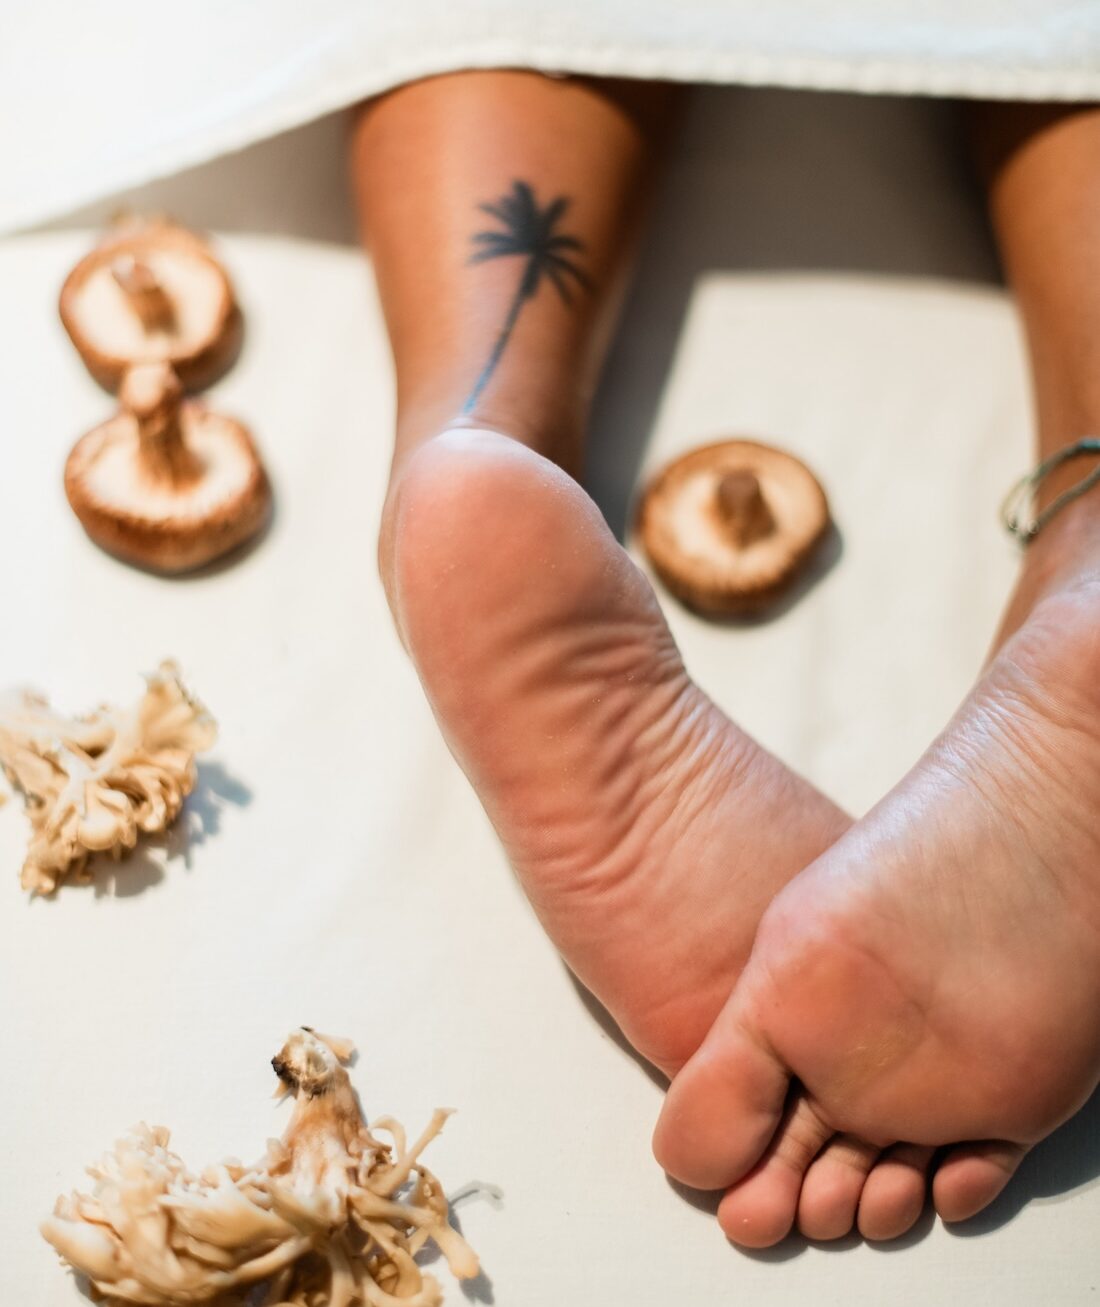 Feet on sand, surrounded by mushrooms